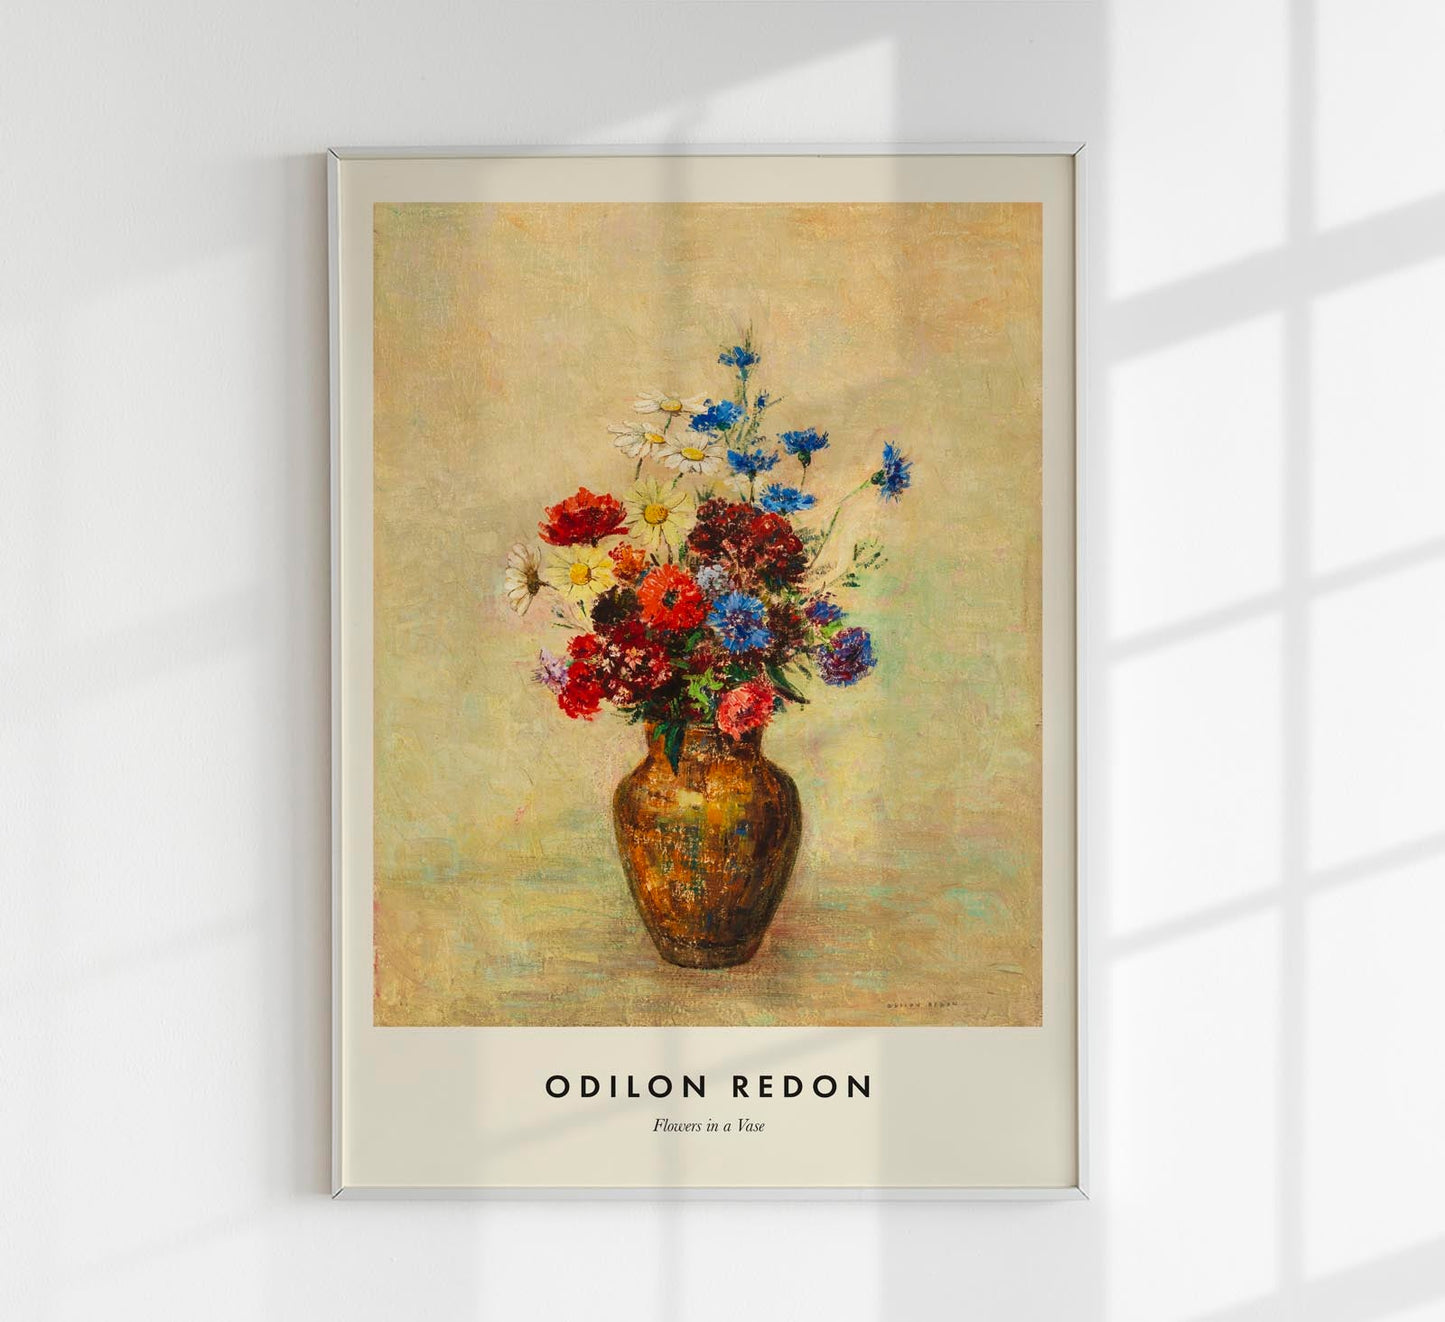 Flowers in a Vase by Odilon Redon